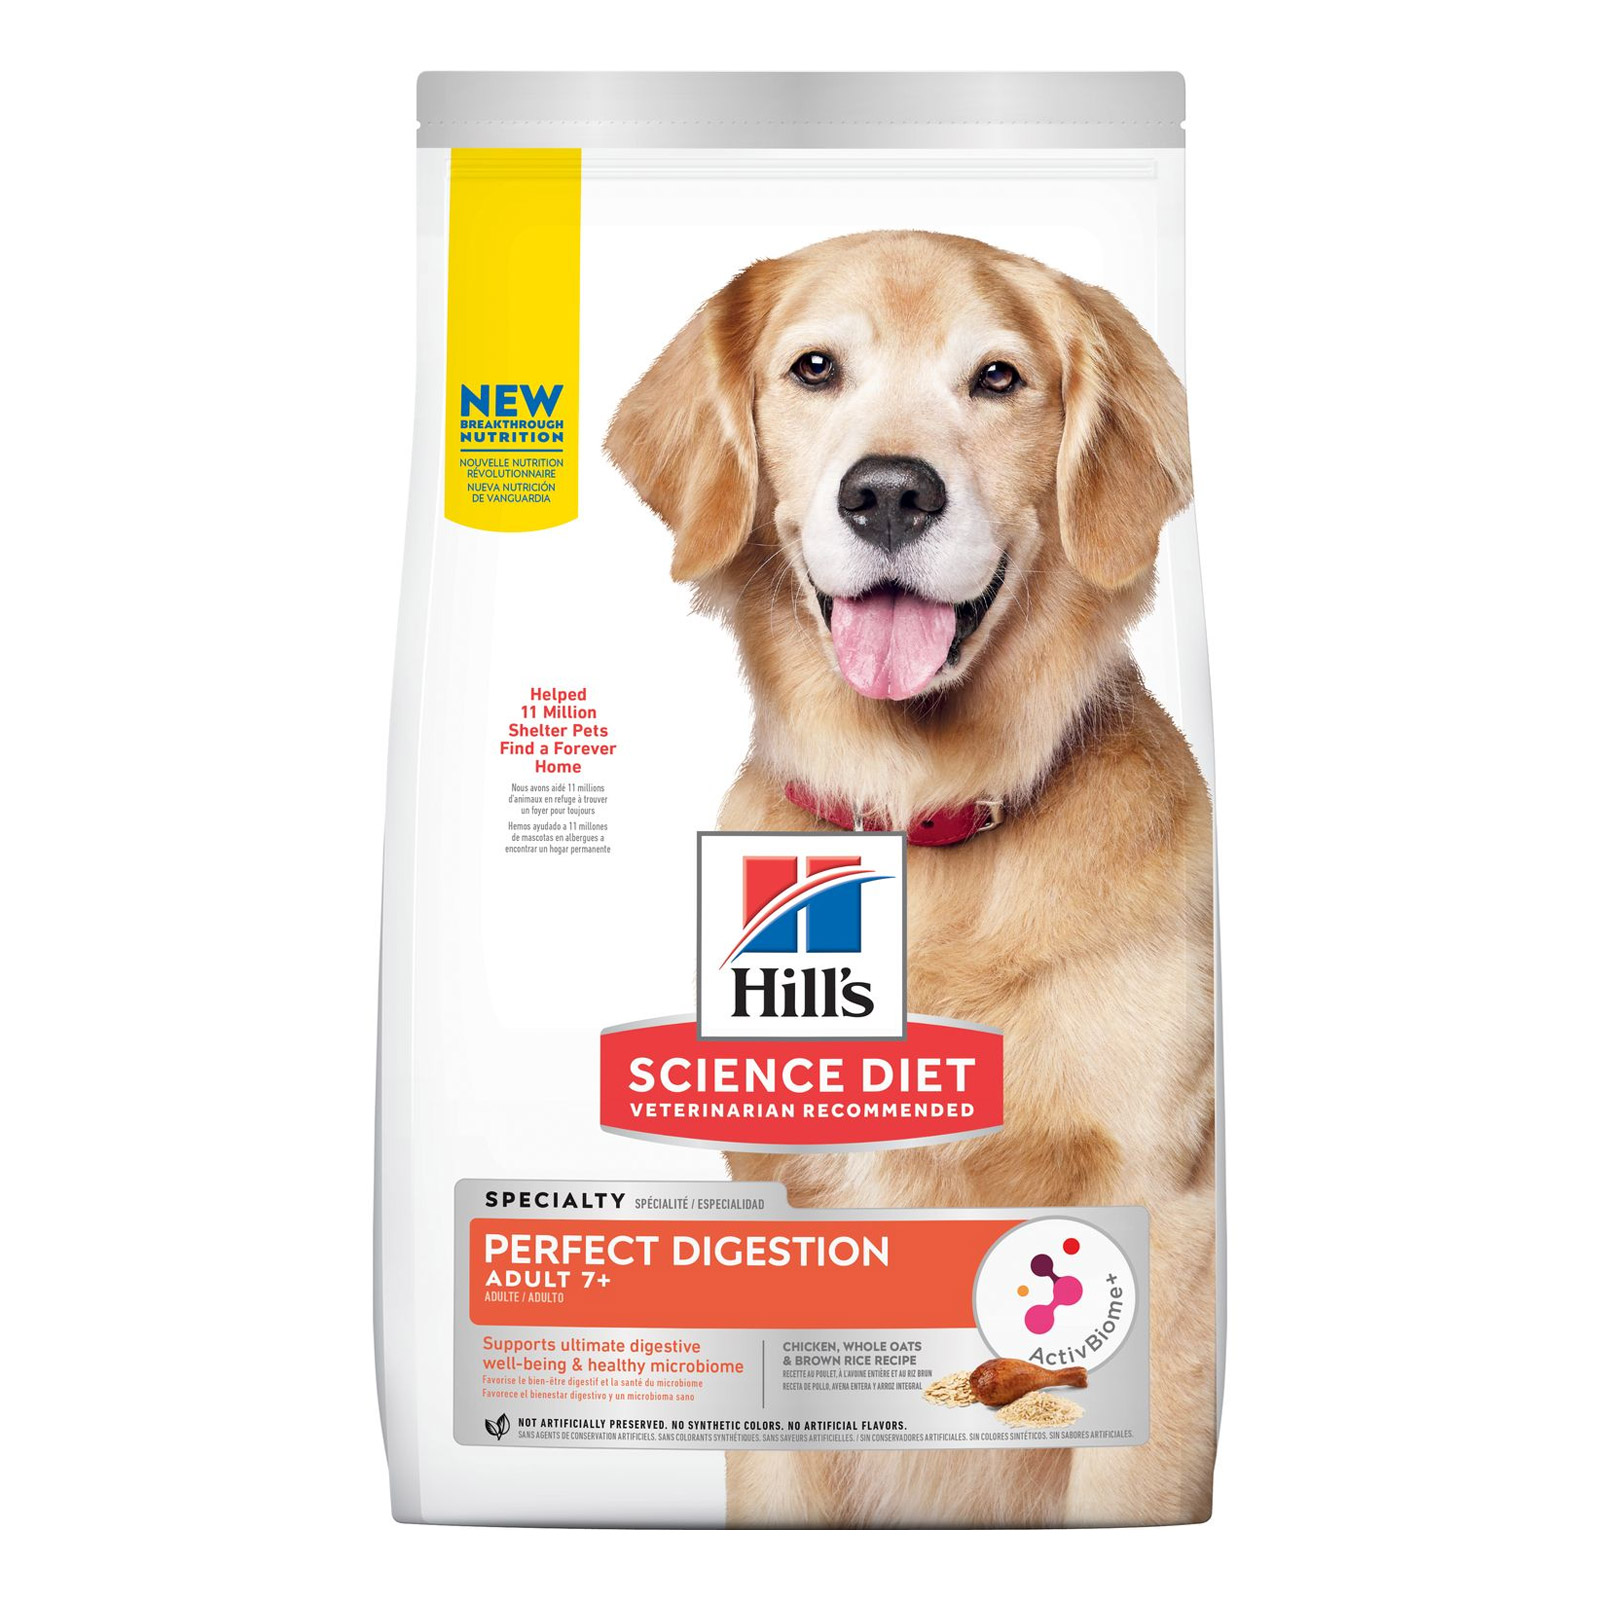 Hill’s Science Diet Adult 7+ Perfect Digestion Dog Food